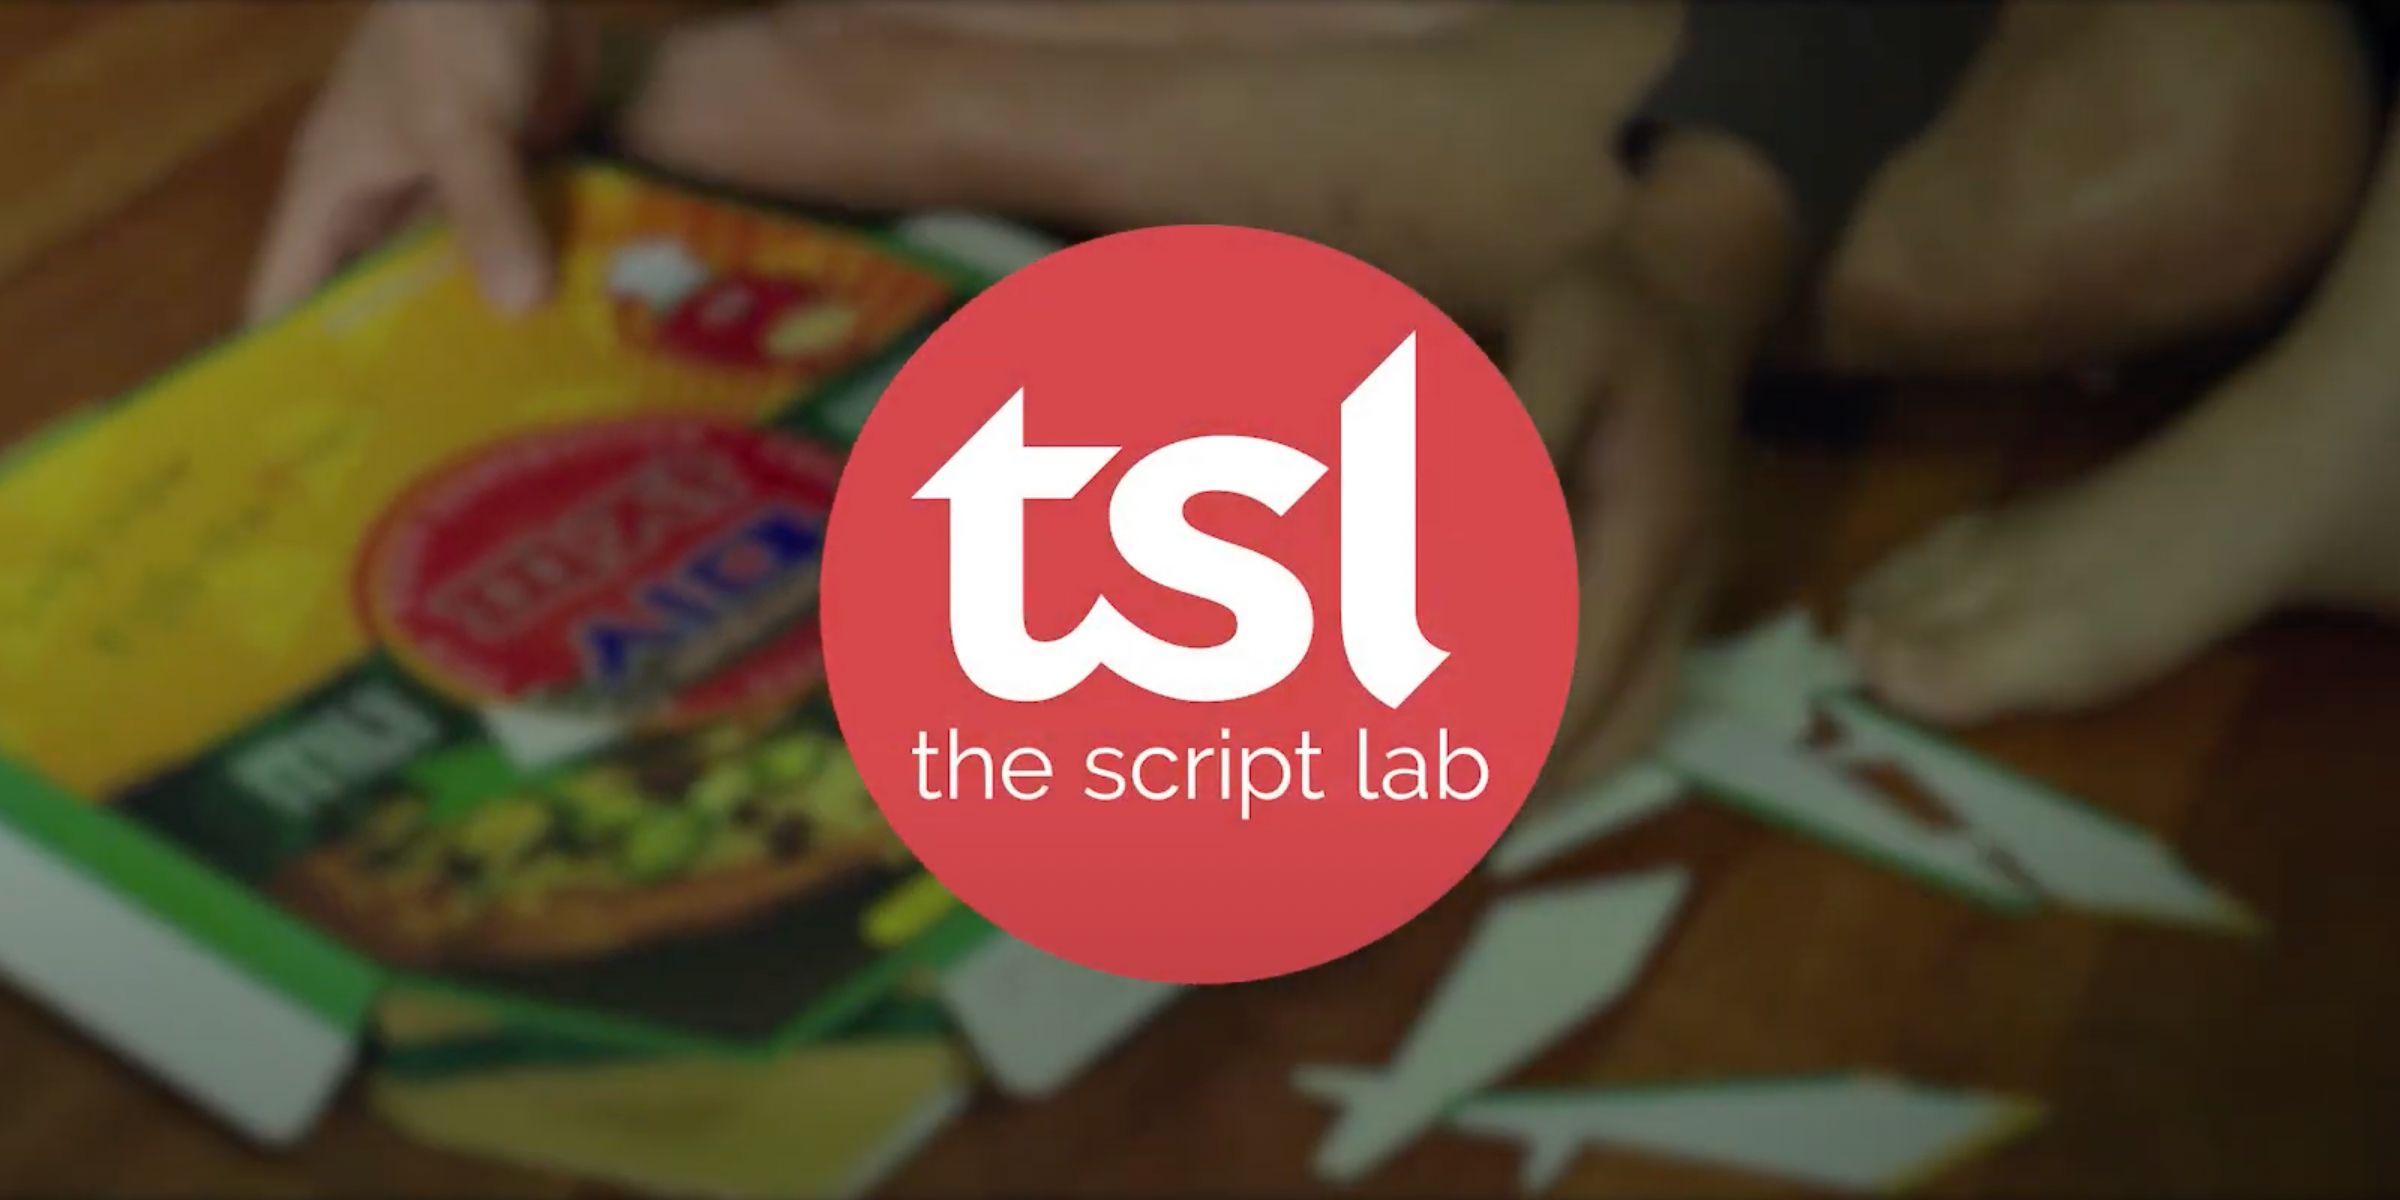 The logo for The Script Lab appears over a shot from 'Parasite' (2019)